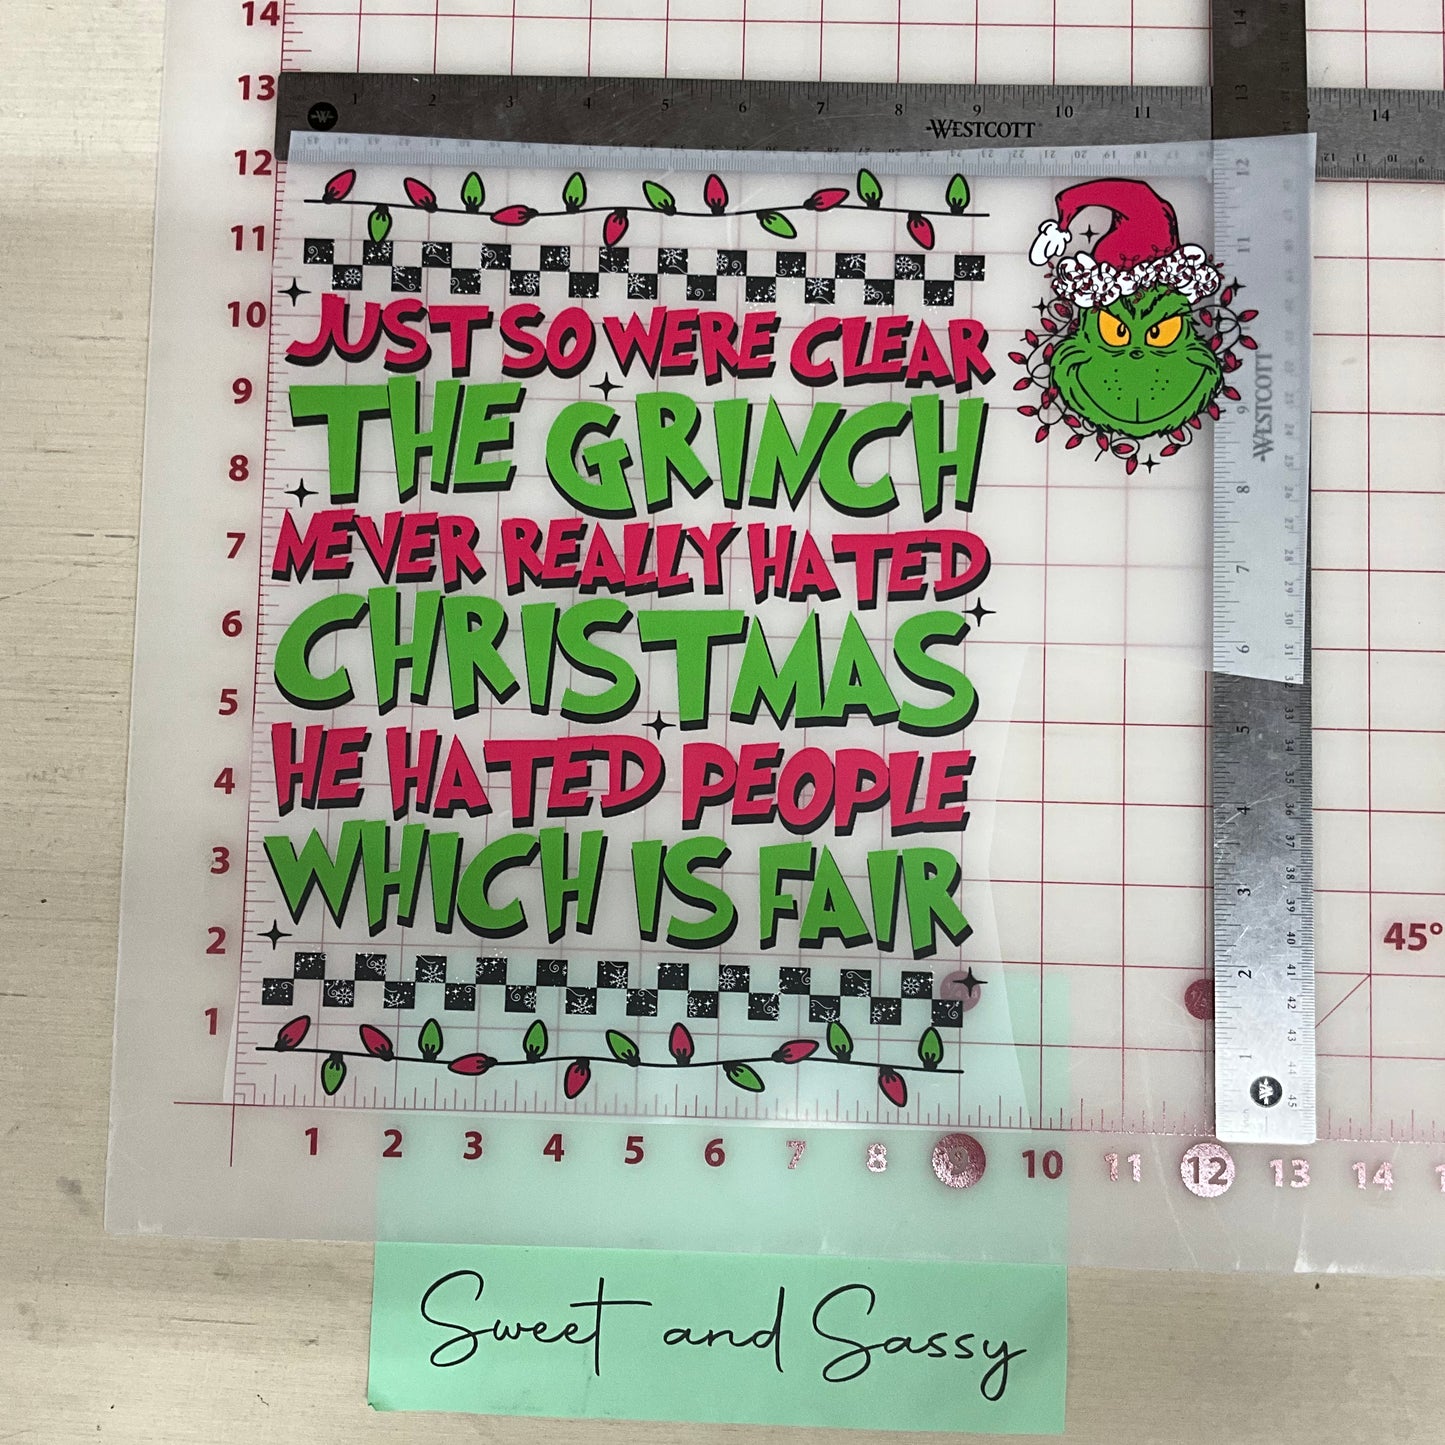 "The Grinch never really hated Christmas" DTF Transfer Design